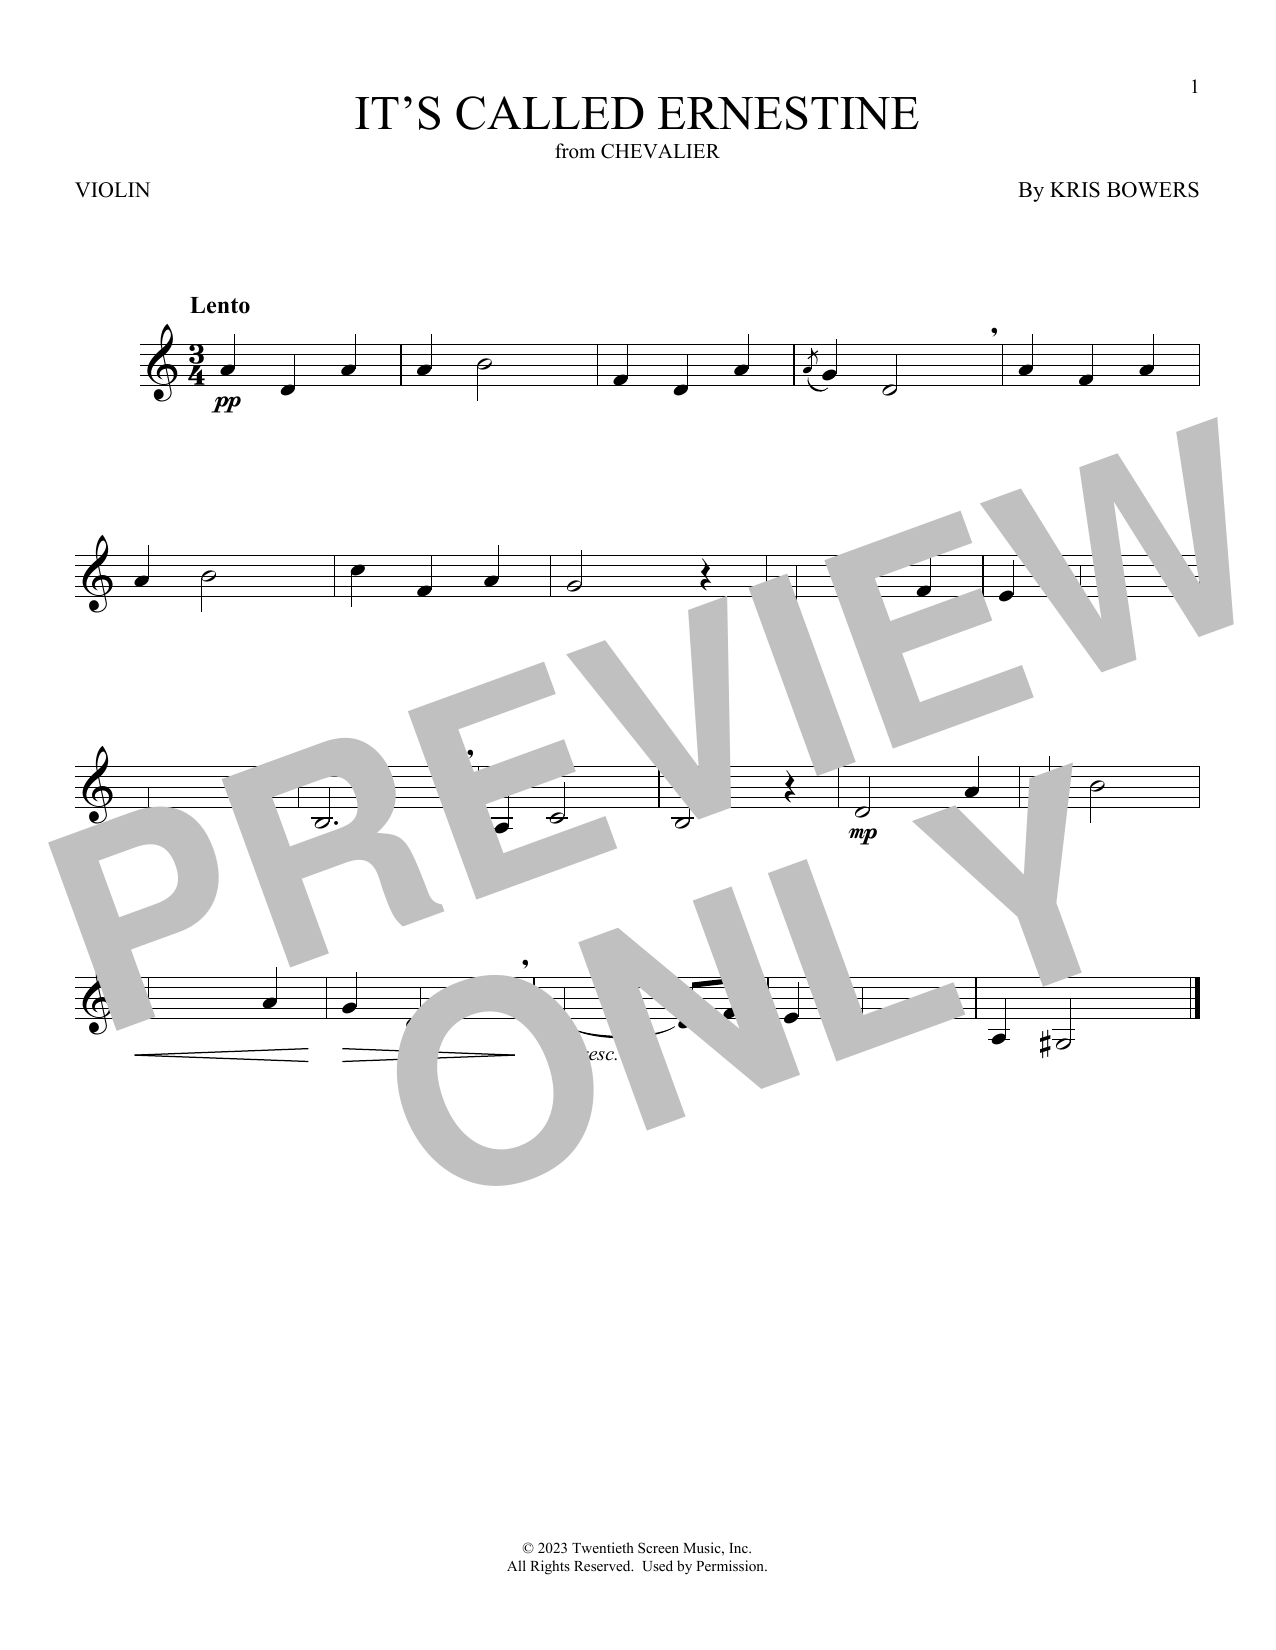 Download Kris Bowers It's Called Ernestine (from Chevalier) Sheet Music